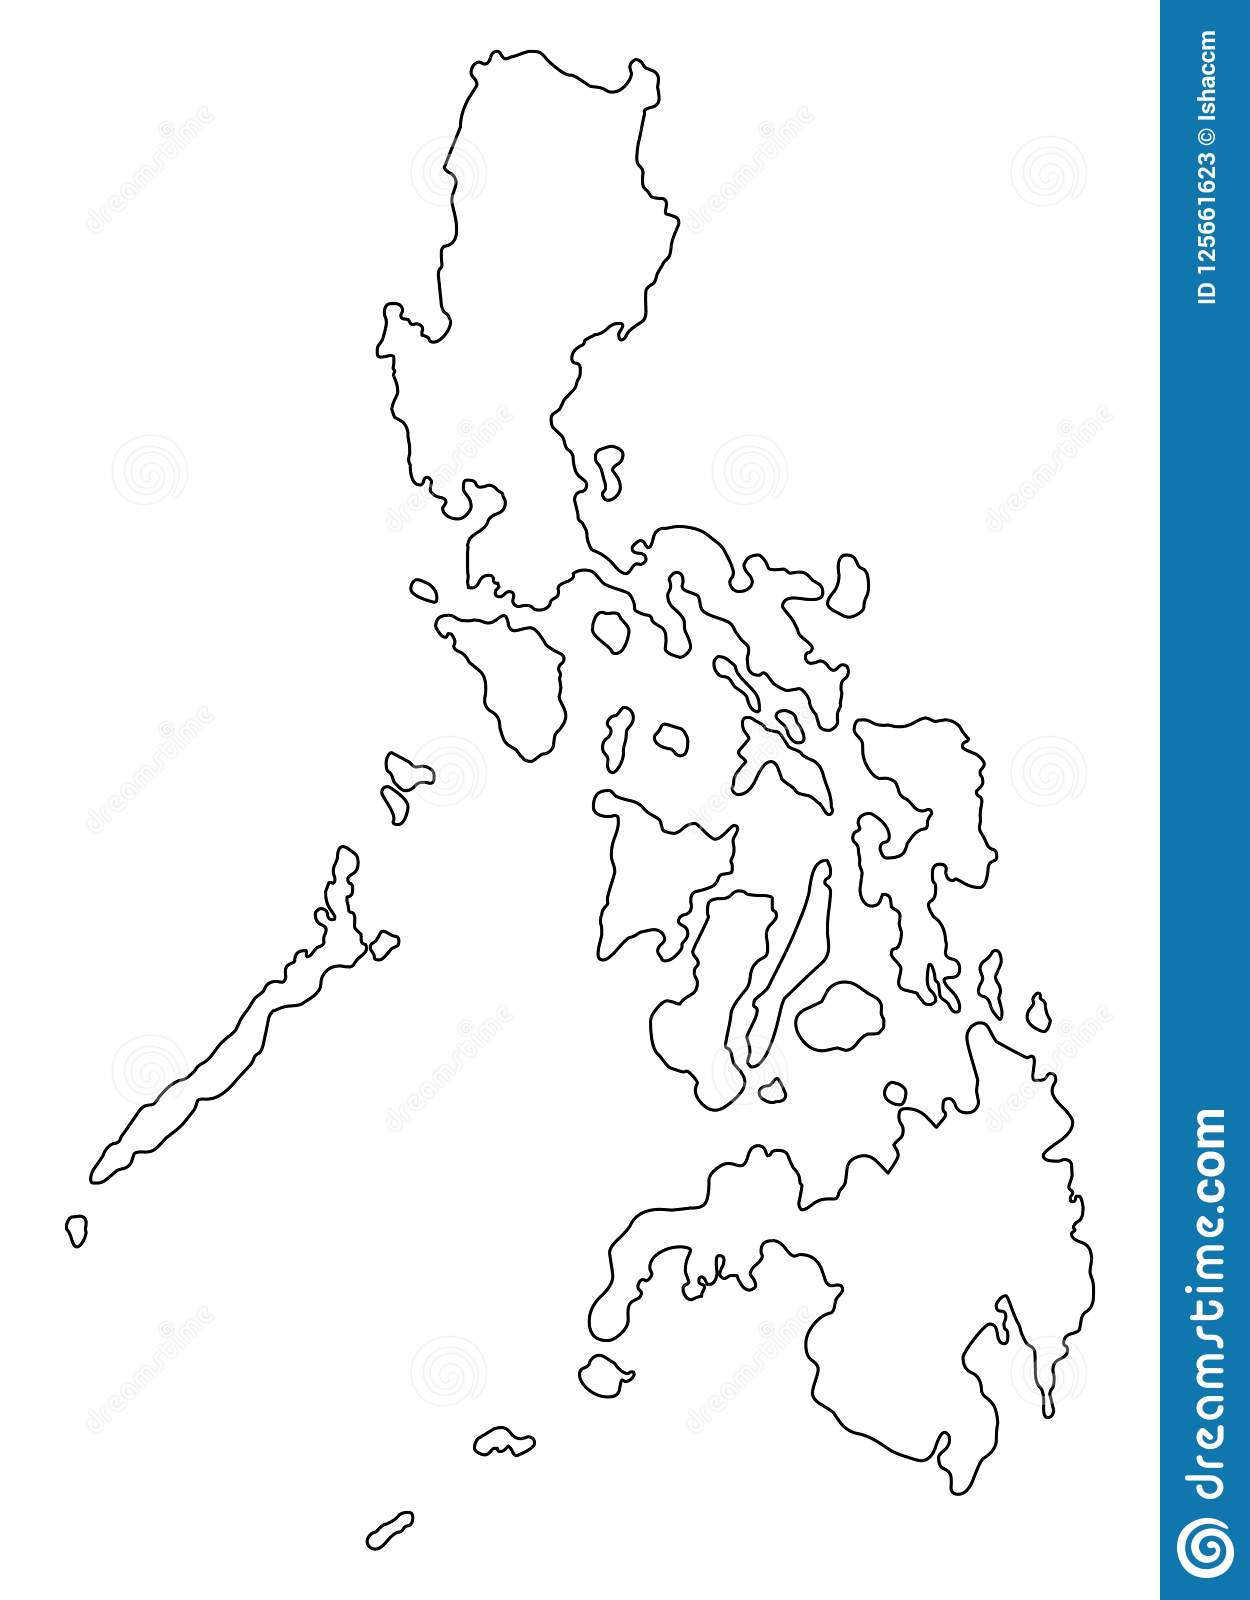 philippine-map-clipart-black-and-white-5-clipart-station-images-and